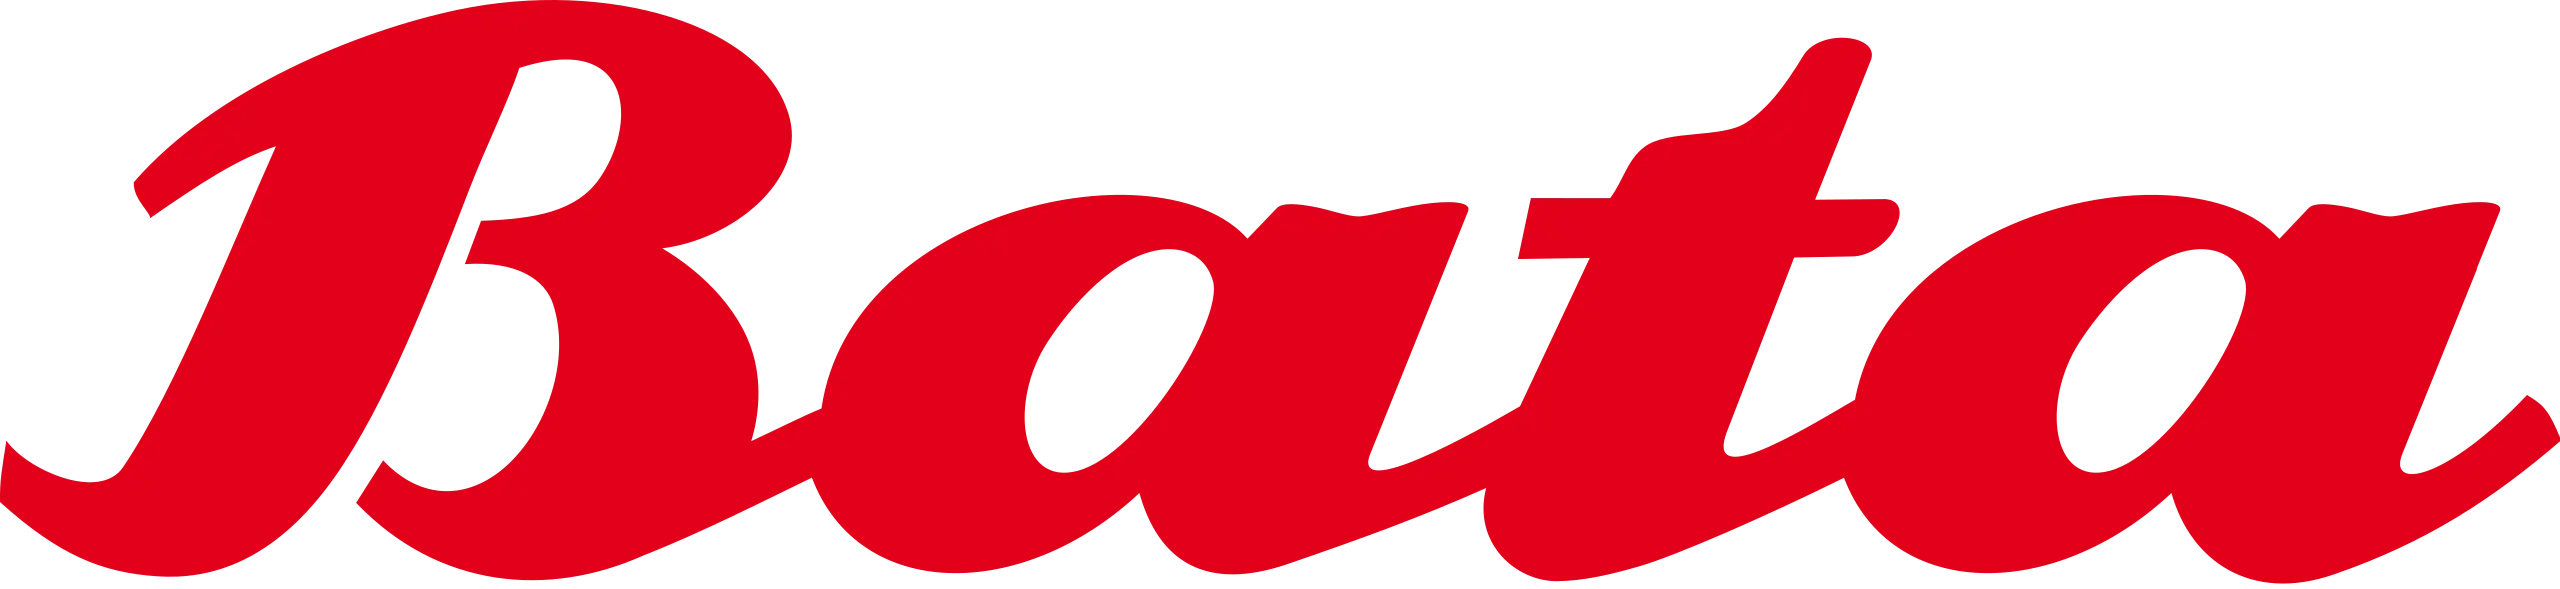 Bata Discount: Get Up To 75% OFF On Orders